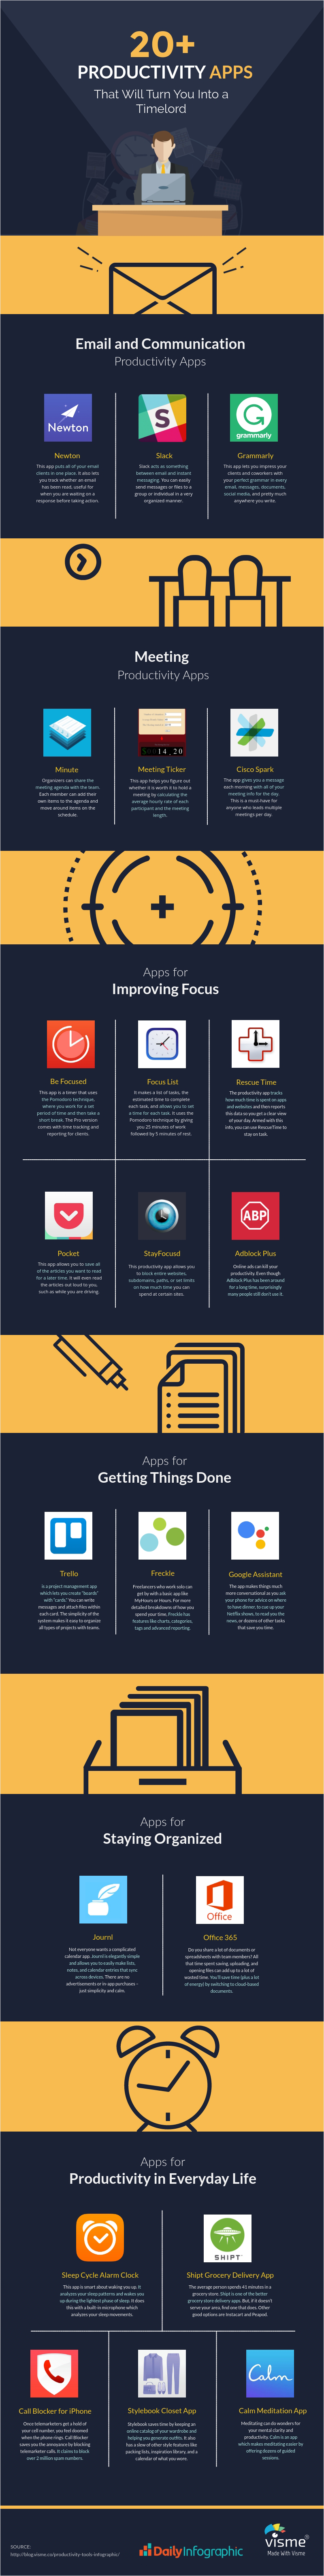 How to Become a Productivity Magician: Apps that Do the Trick! - Infographic